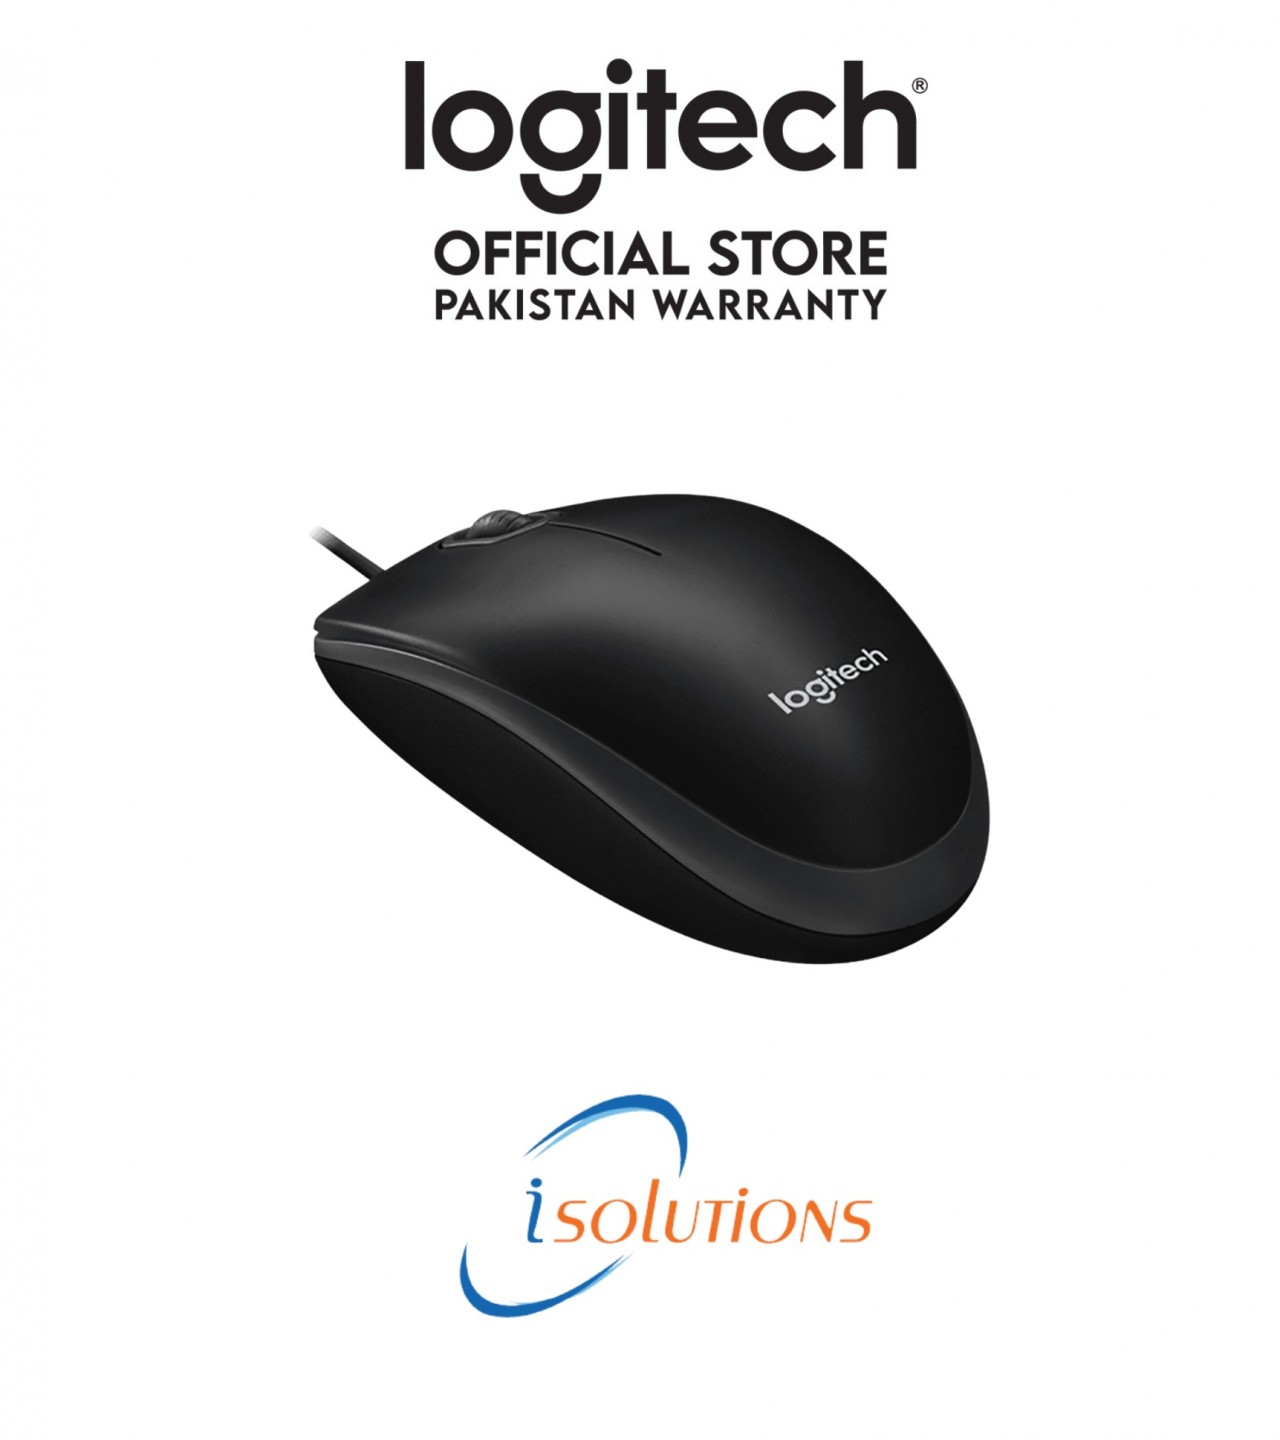 Logitech B100 Optical USB Wired Mouse